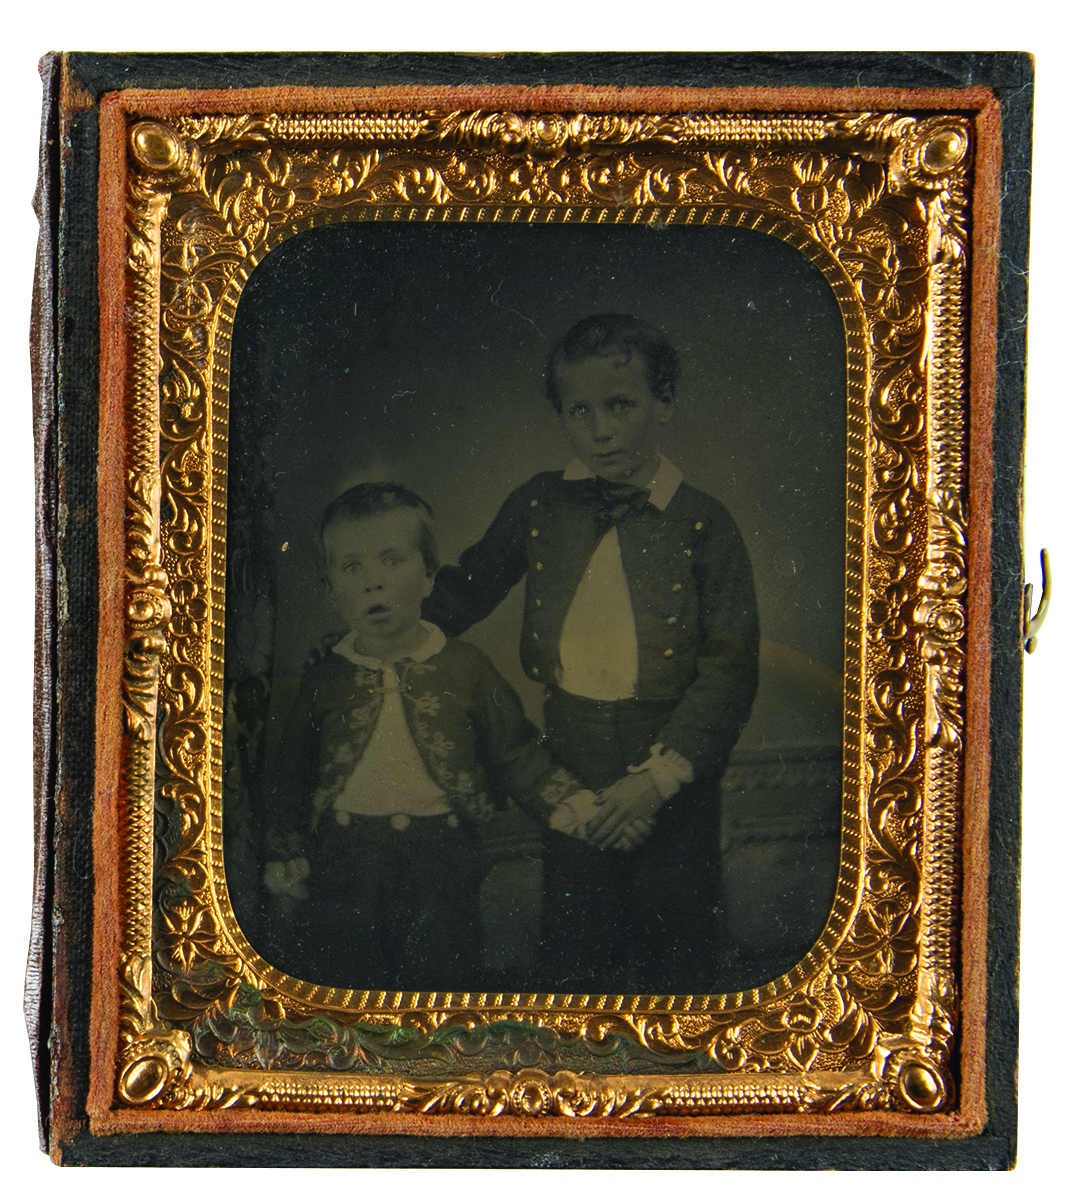 Lot #2075 Union Soldier's Children Tintype Carried in War - Image 1